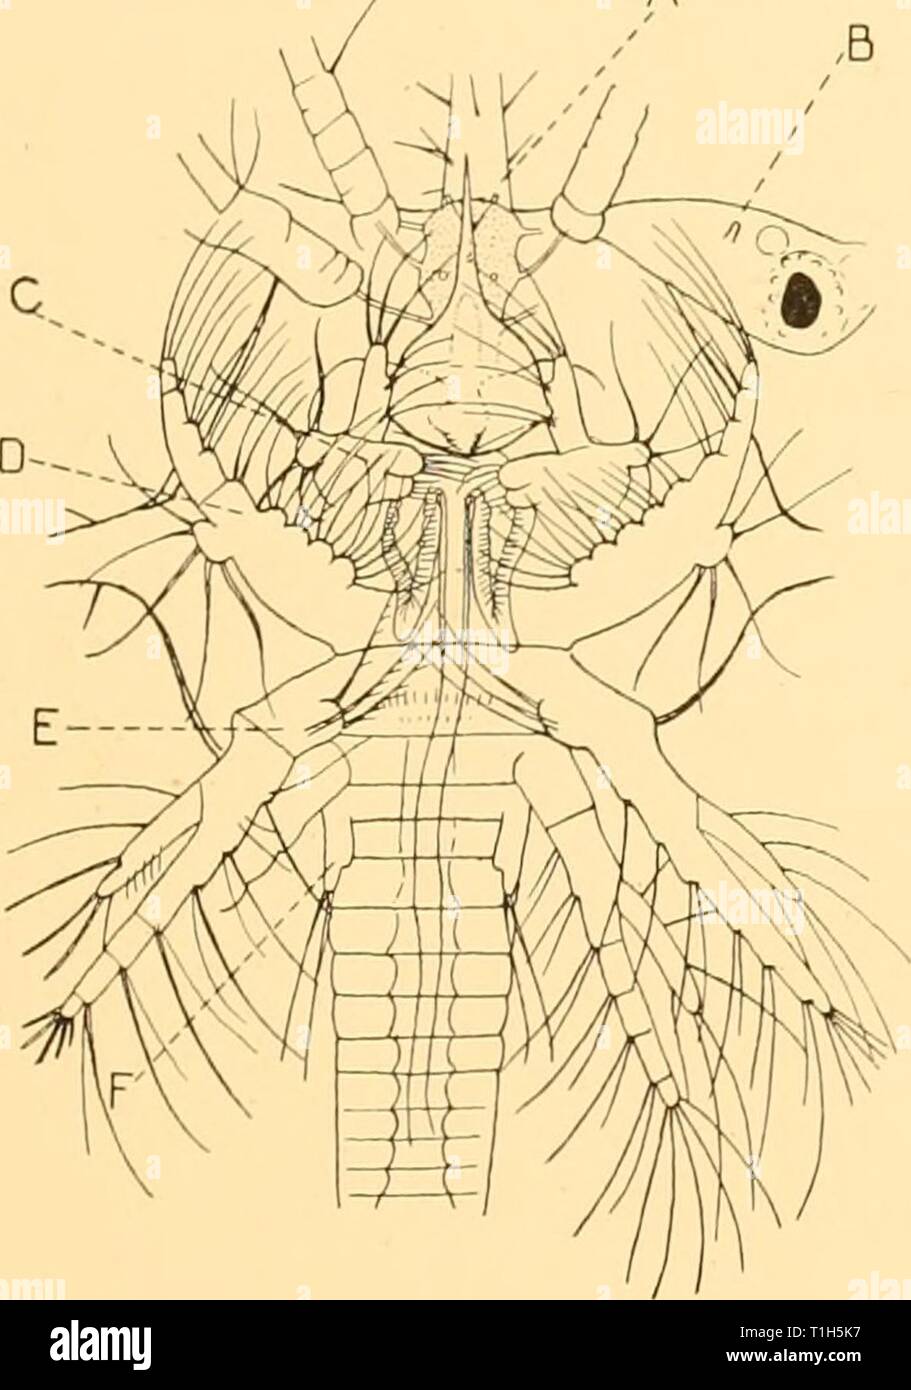 Discovery reports (1941) Discovery reports  discoveryreports20inst Year: 1941  LARVAE OF SERGESTES 25 Elaphocaris 3 (Fig. 15 b). Length i-86. Rostrum i-omm. Rostrum much shorter in proportion than in stage 2, but about as long as carapace. Supraorbital, lateral and posterior processes very hispid. Supraorbital longer than eye. Telson as in stage 2. Abdominal somites with very small pleural spines, and with very small dorsal points. Eye about three-quarters length of carapace, the eyeball asymmetrical. Papilla not seen in dorsal view. Colour. Red in rostrum, and two lines down thorax and abdome Stock Photo